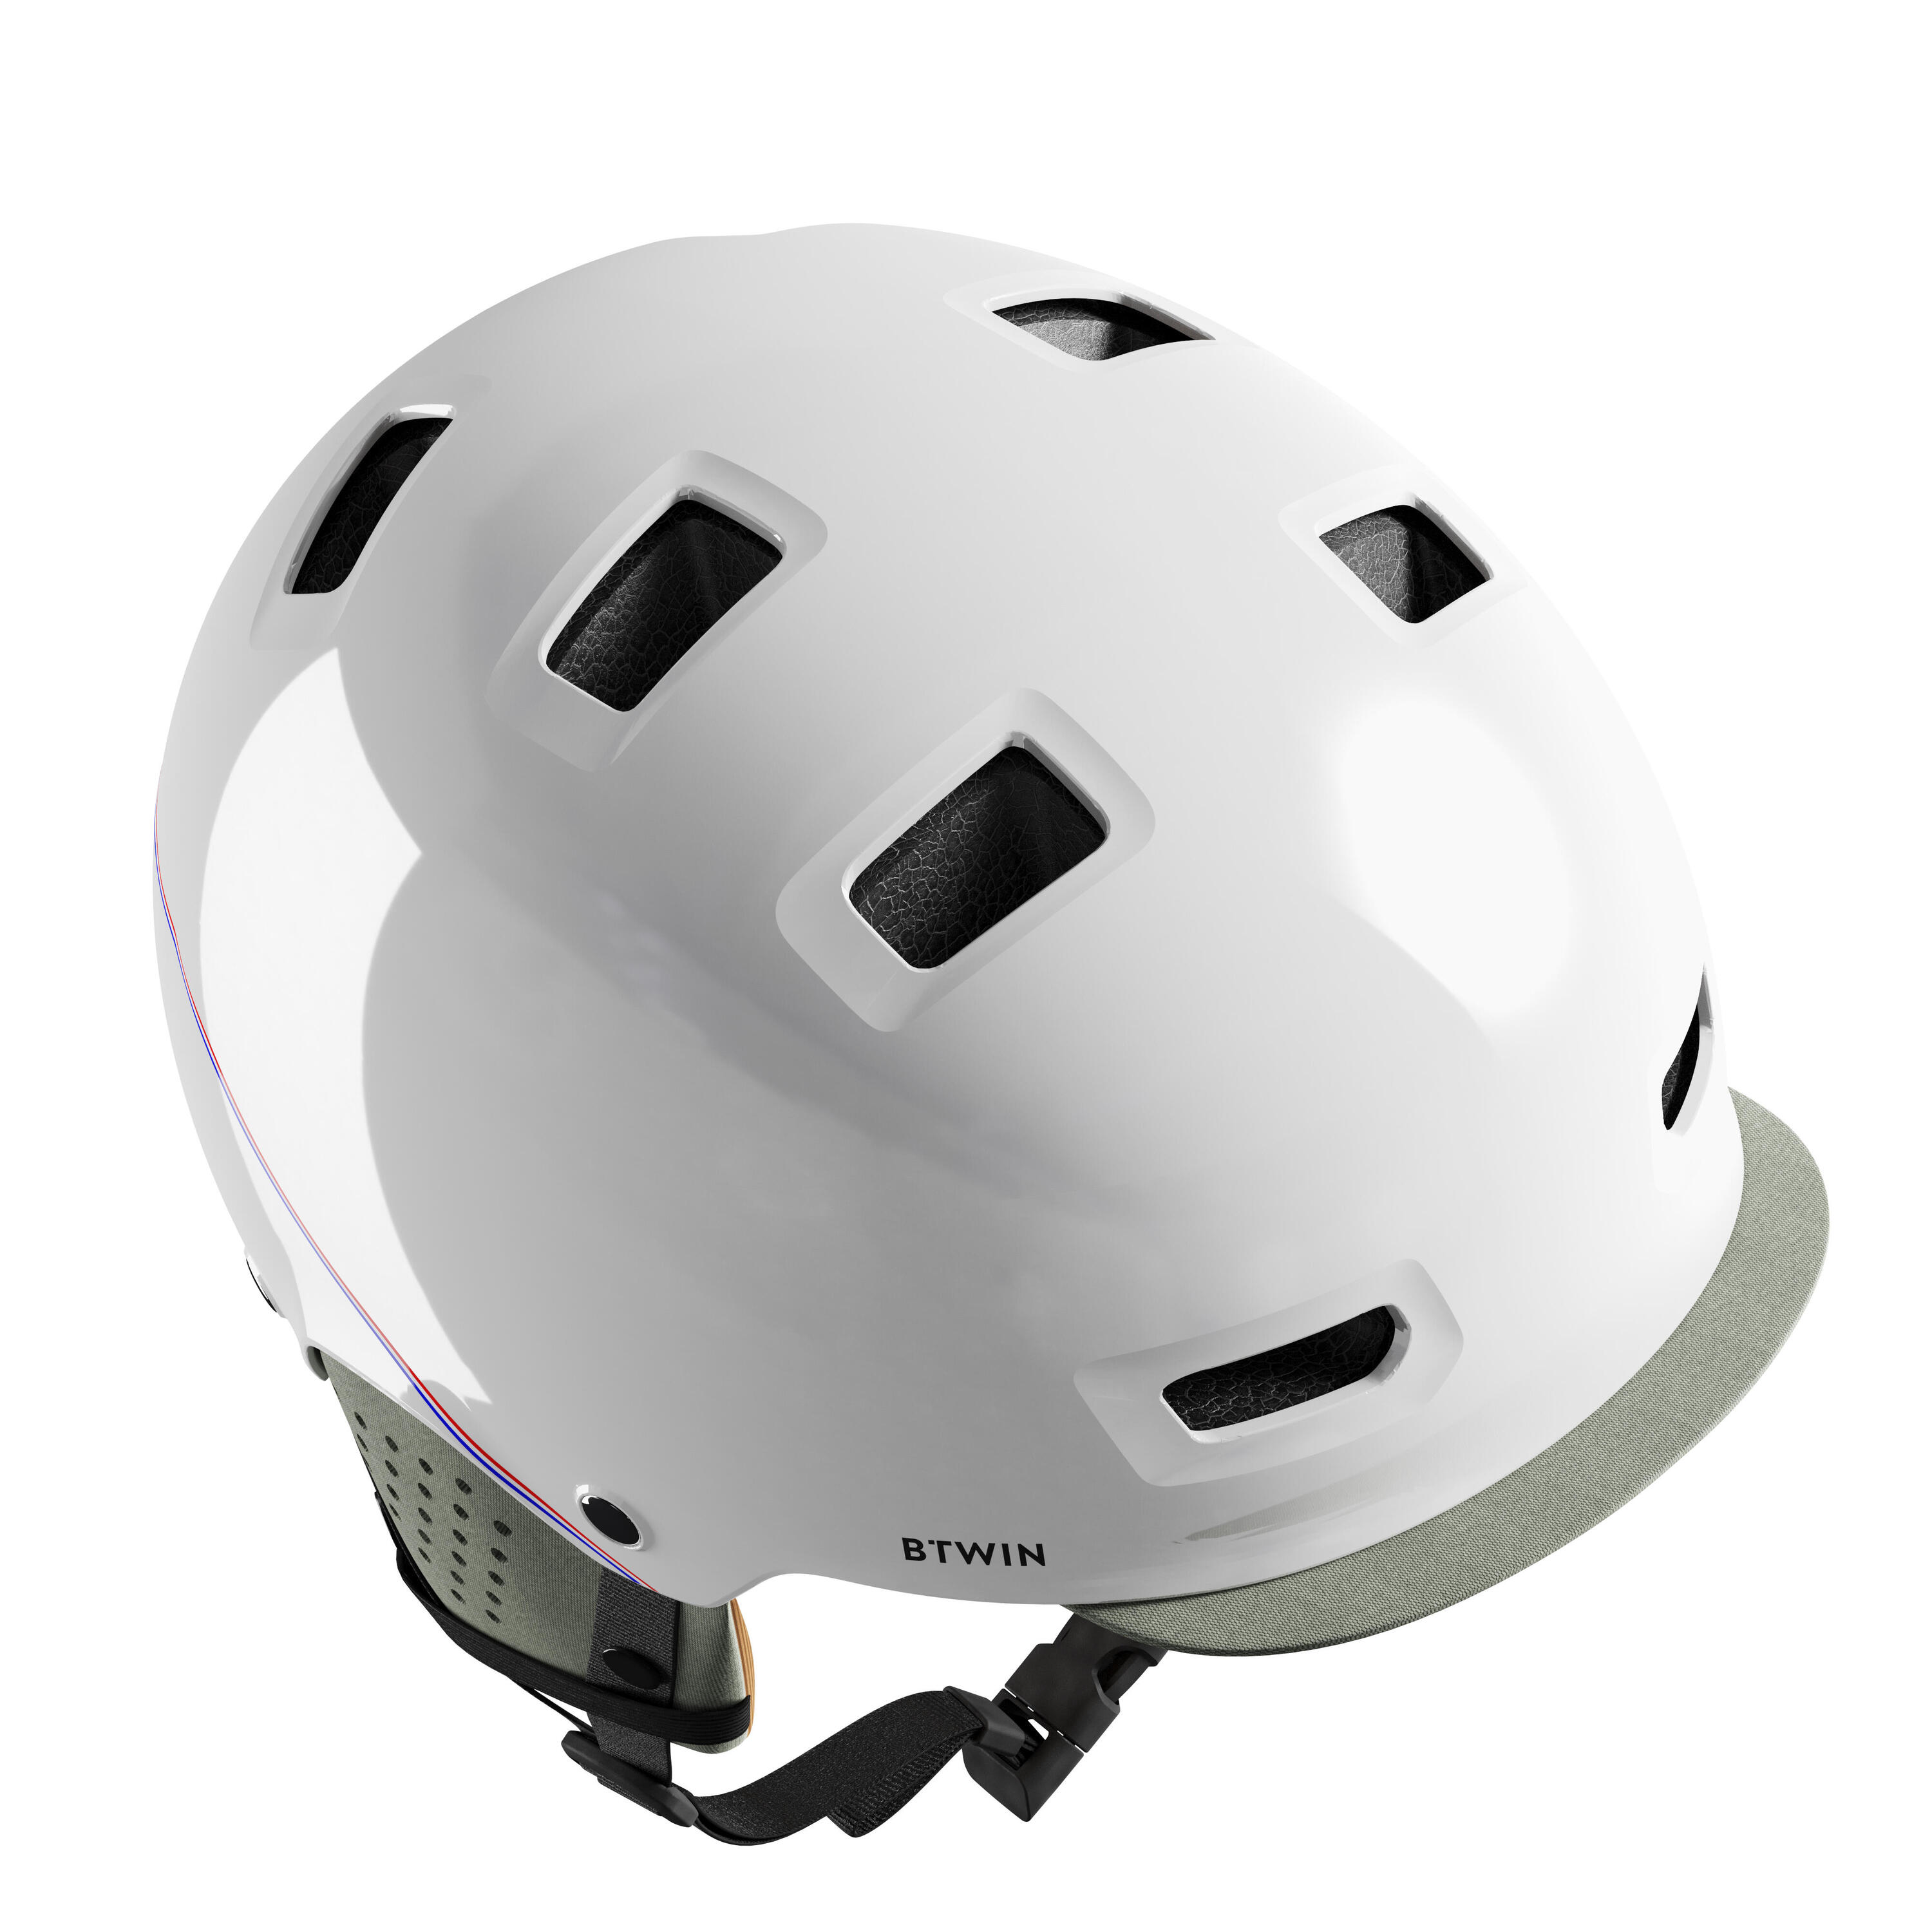 BTWIN City Cycling Bowl Helmet 500 - White/French